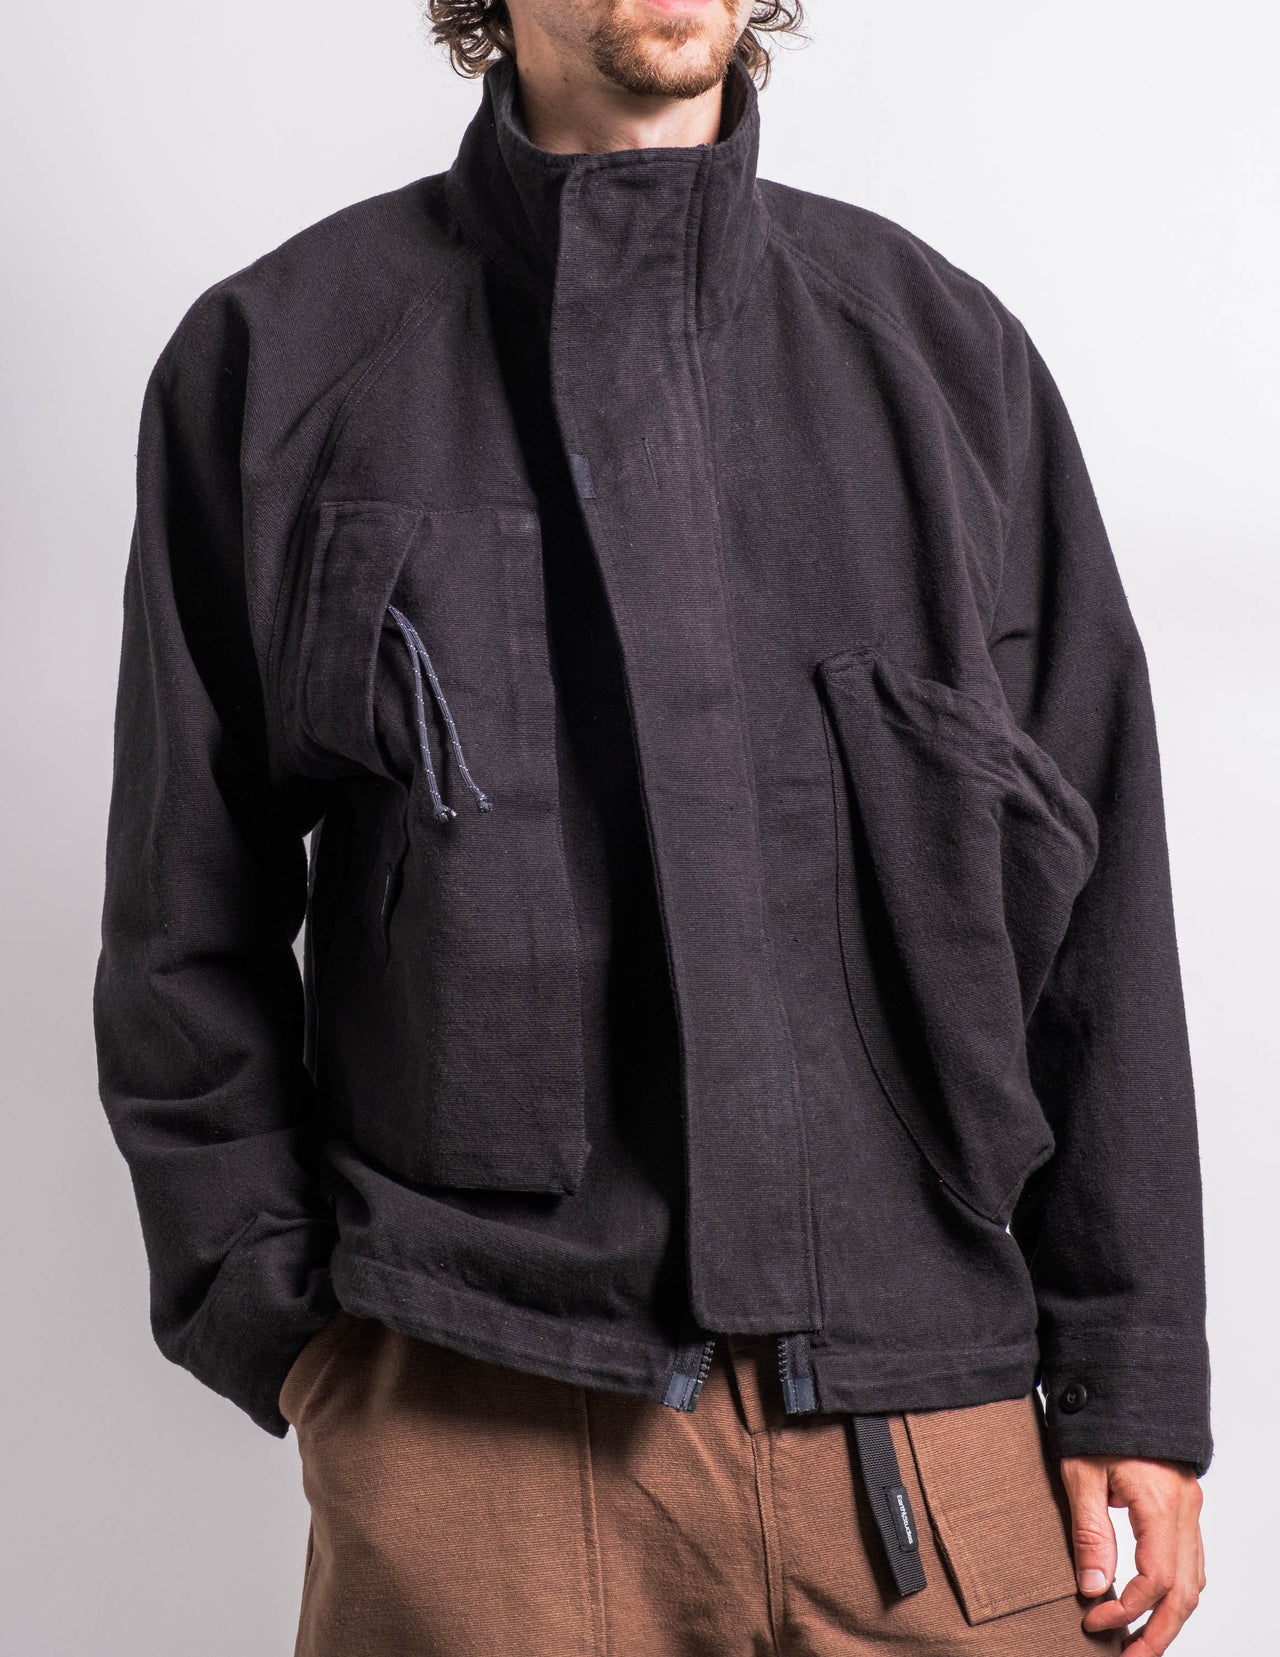 MS-106 Foraging Jacket in Charcoal